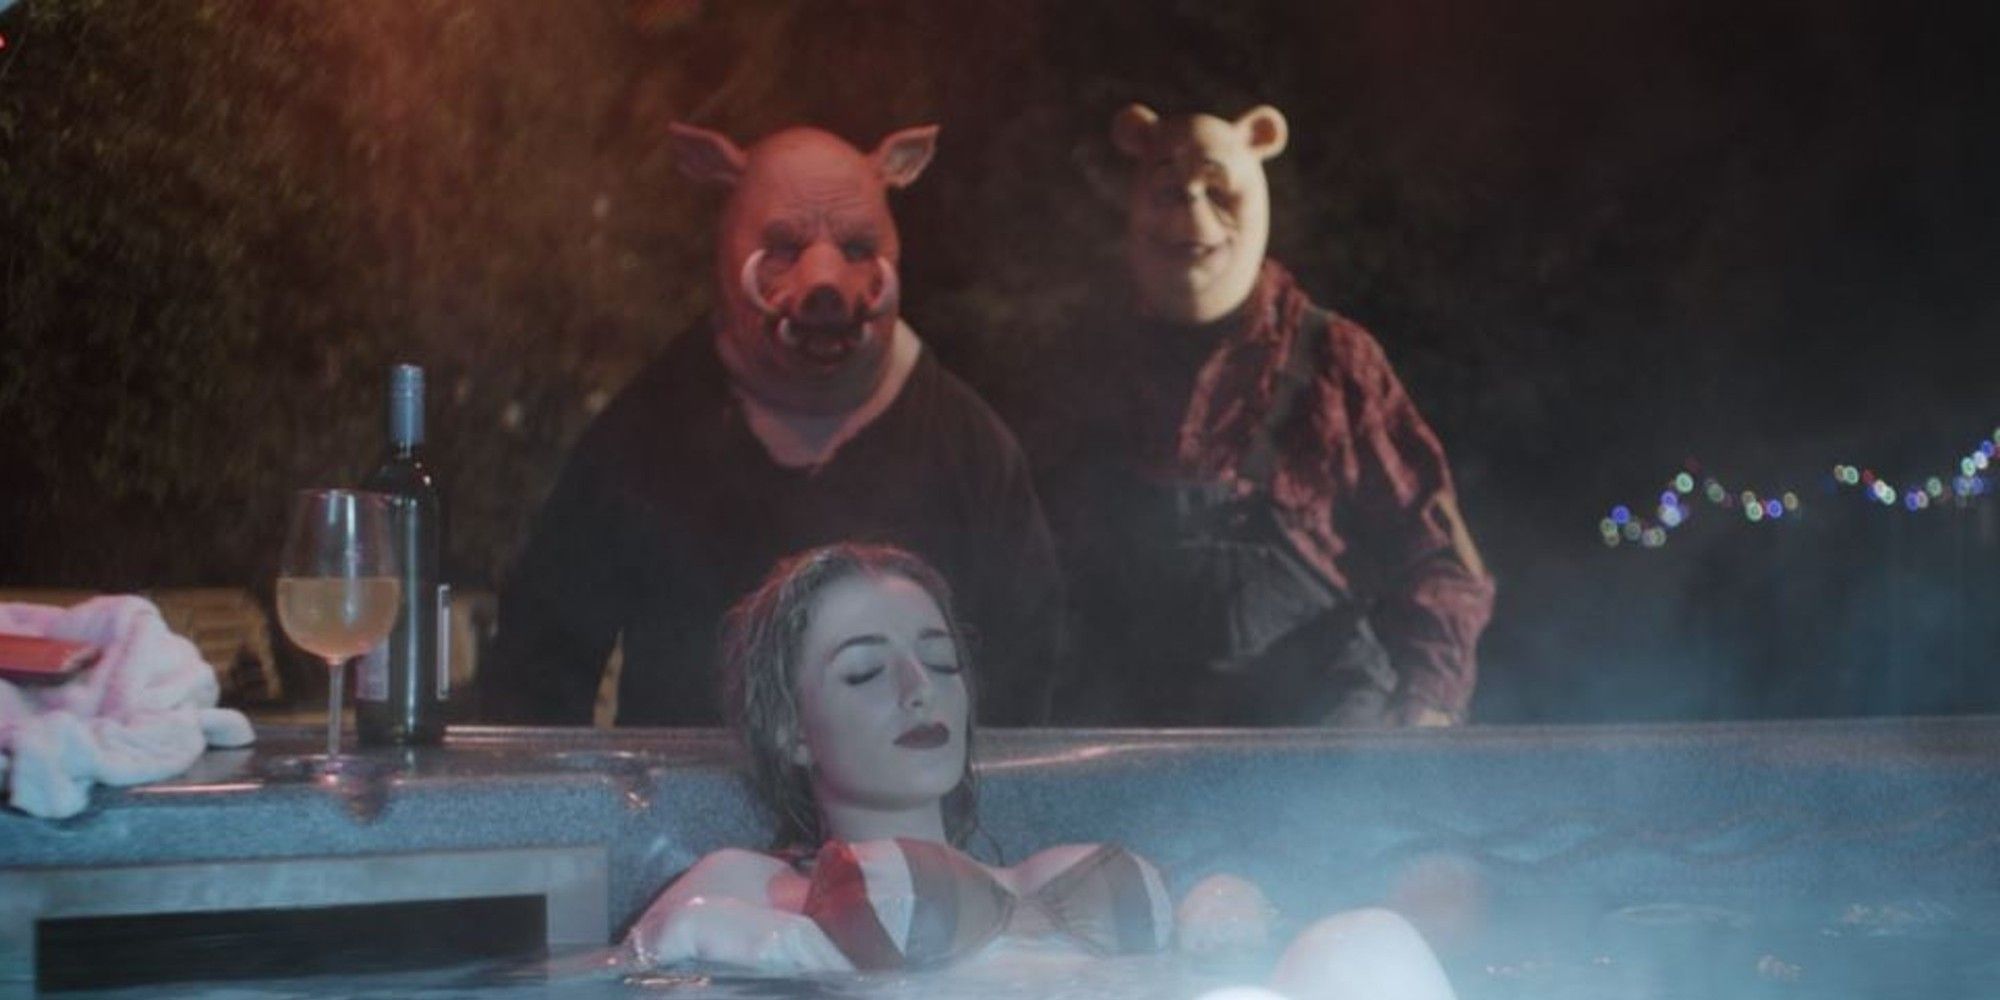 Piglet and Winnie sneaking behind a girl in a jacuzzi in Winnie The Pooh horror film